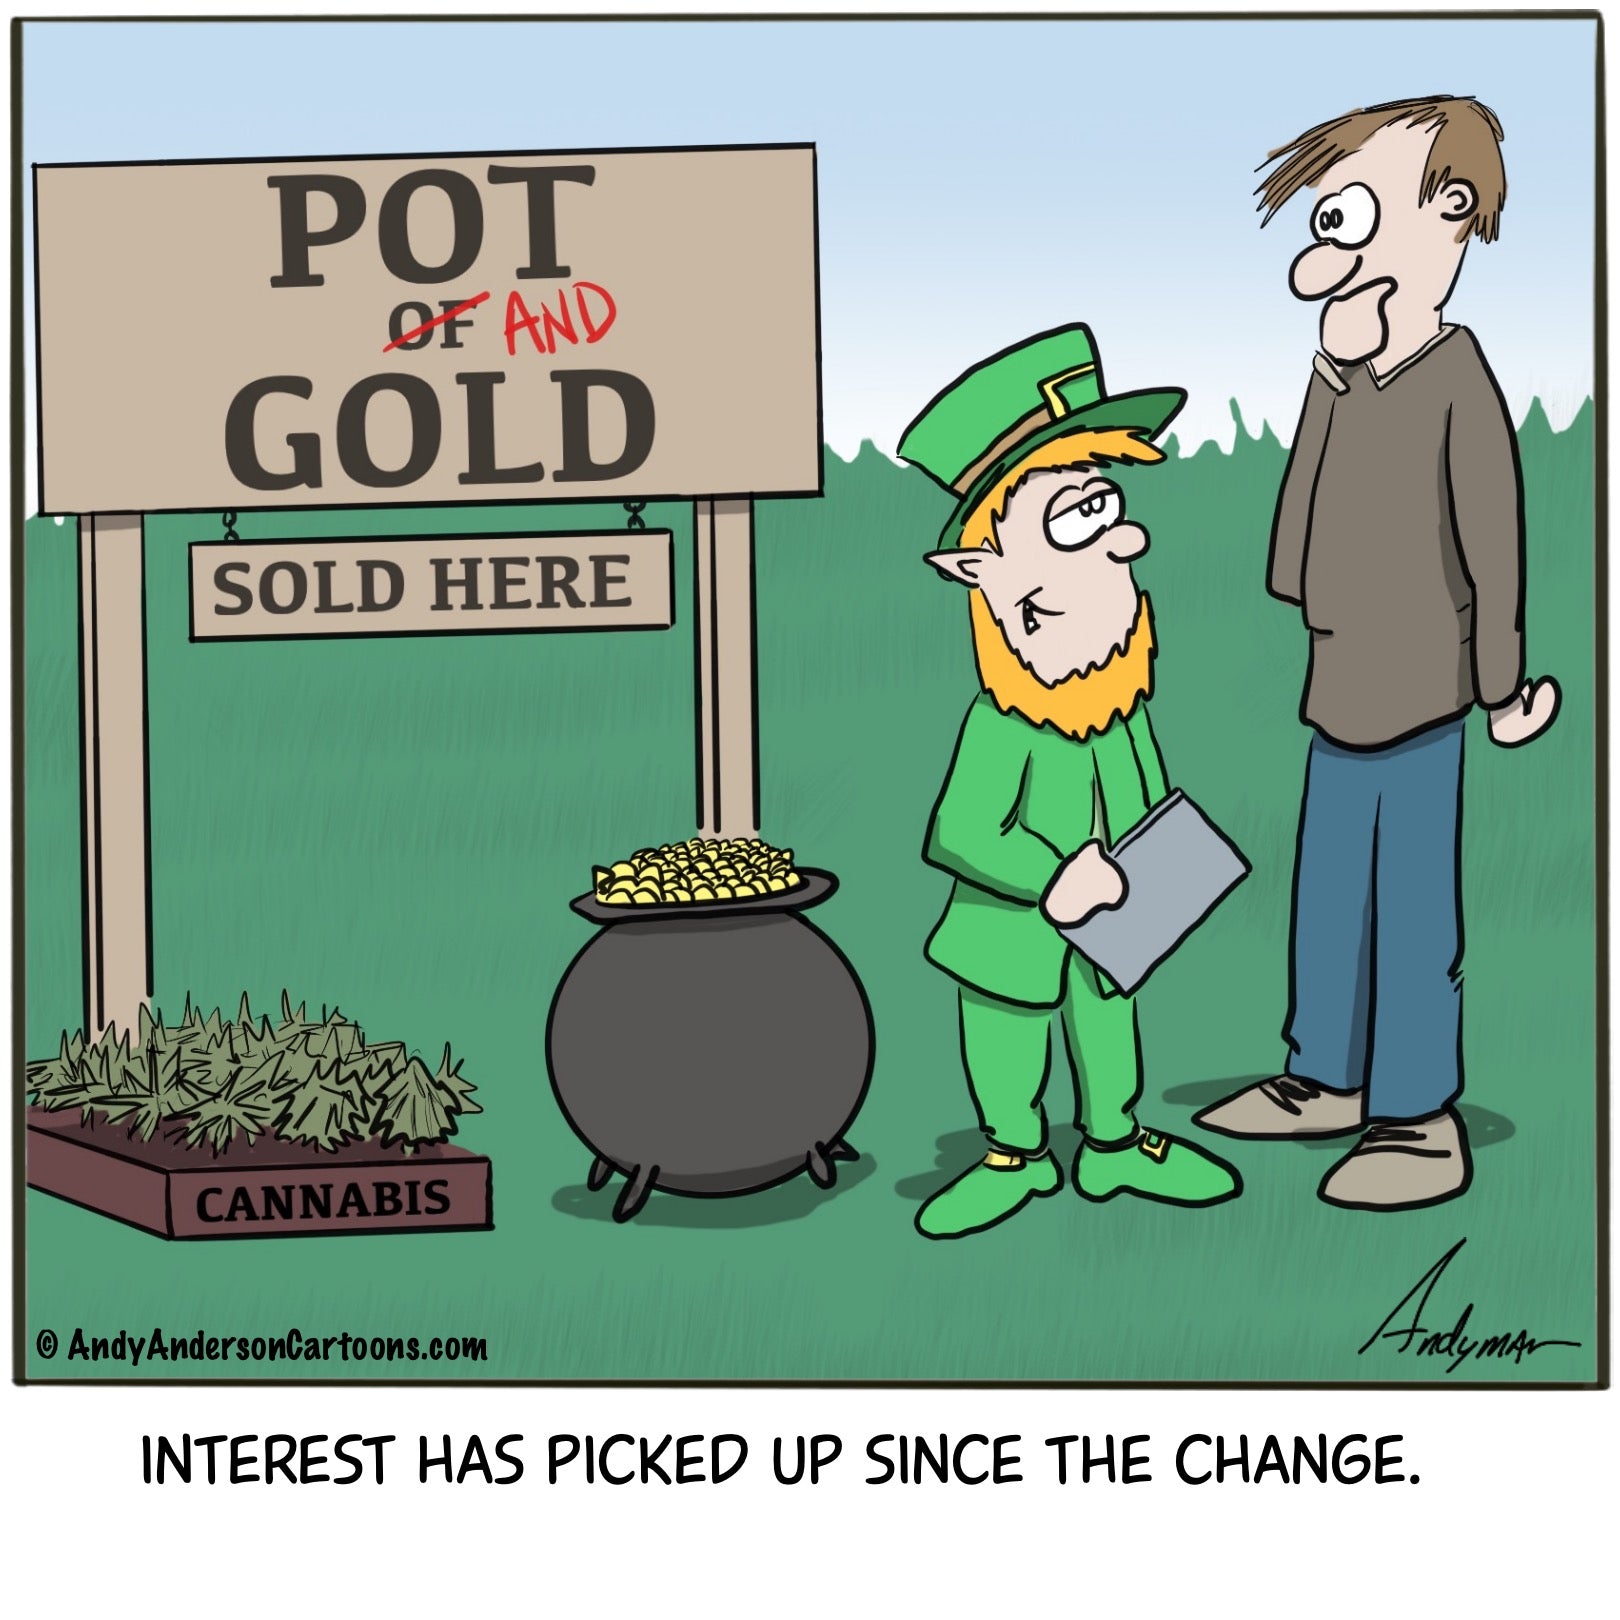 Cartoon about renaming "pot of gold" to "pot and gold" to drive more business